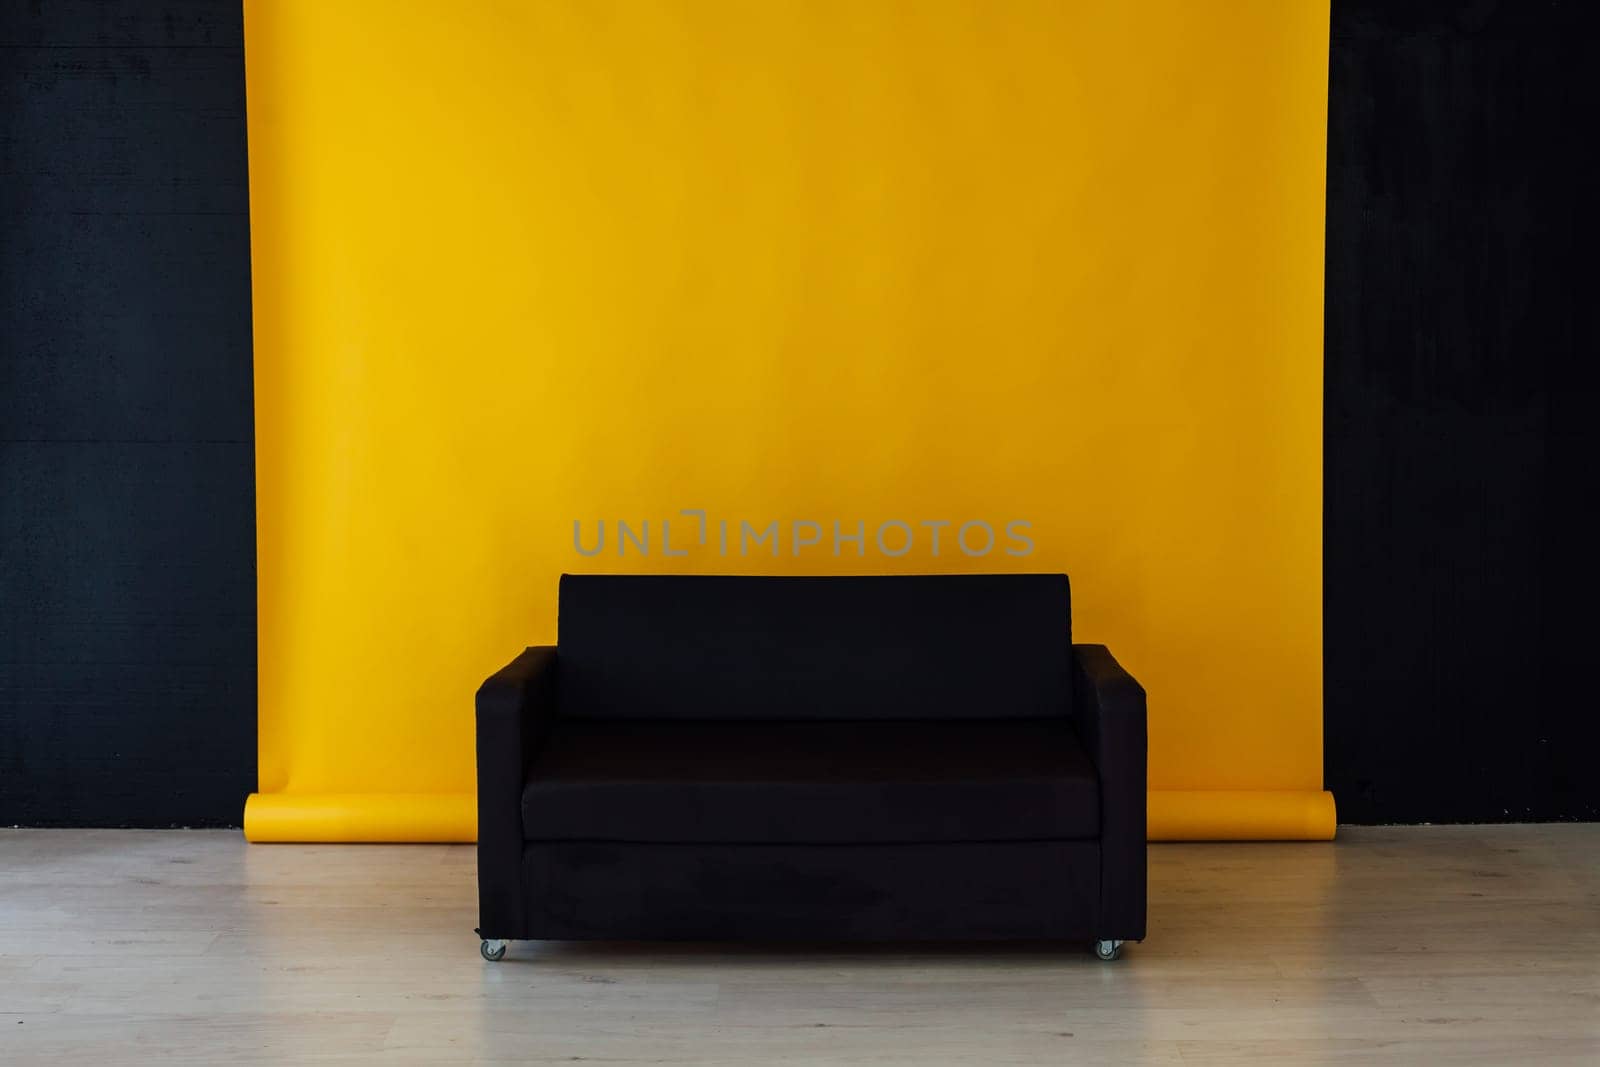 black sofa in the interior of the yellow room by Simakov